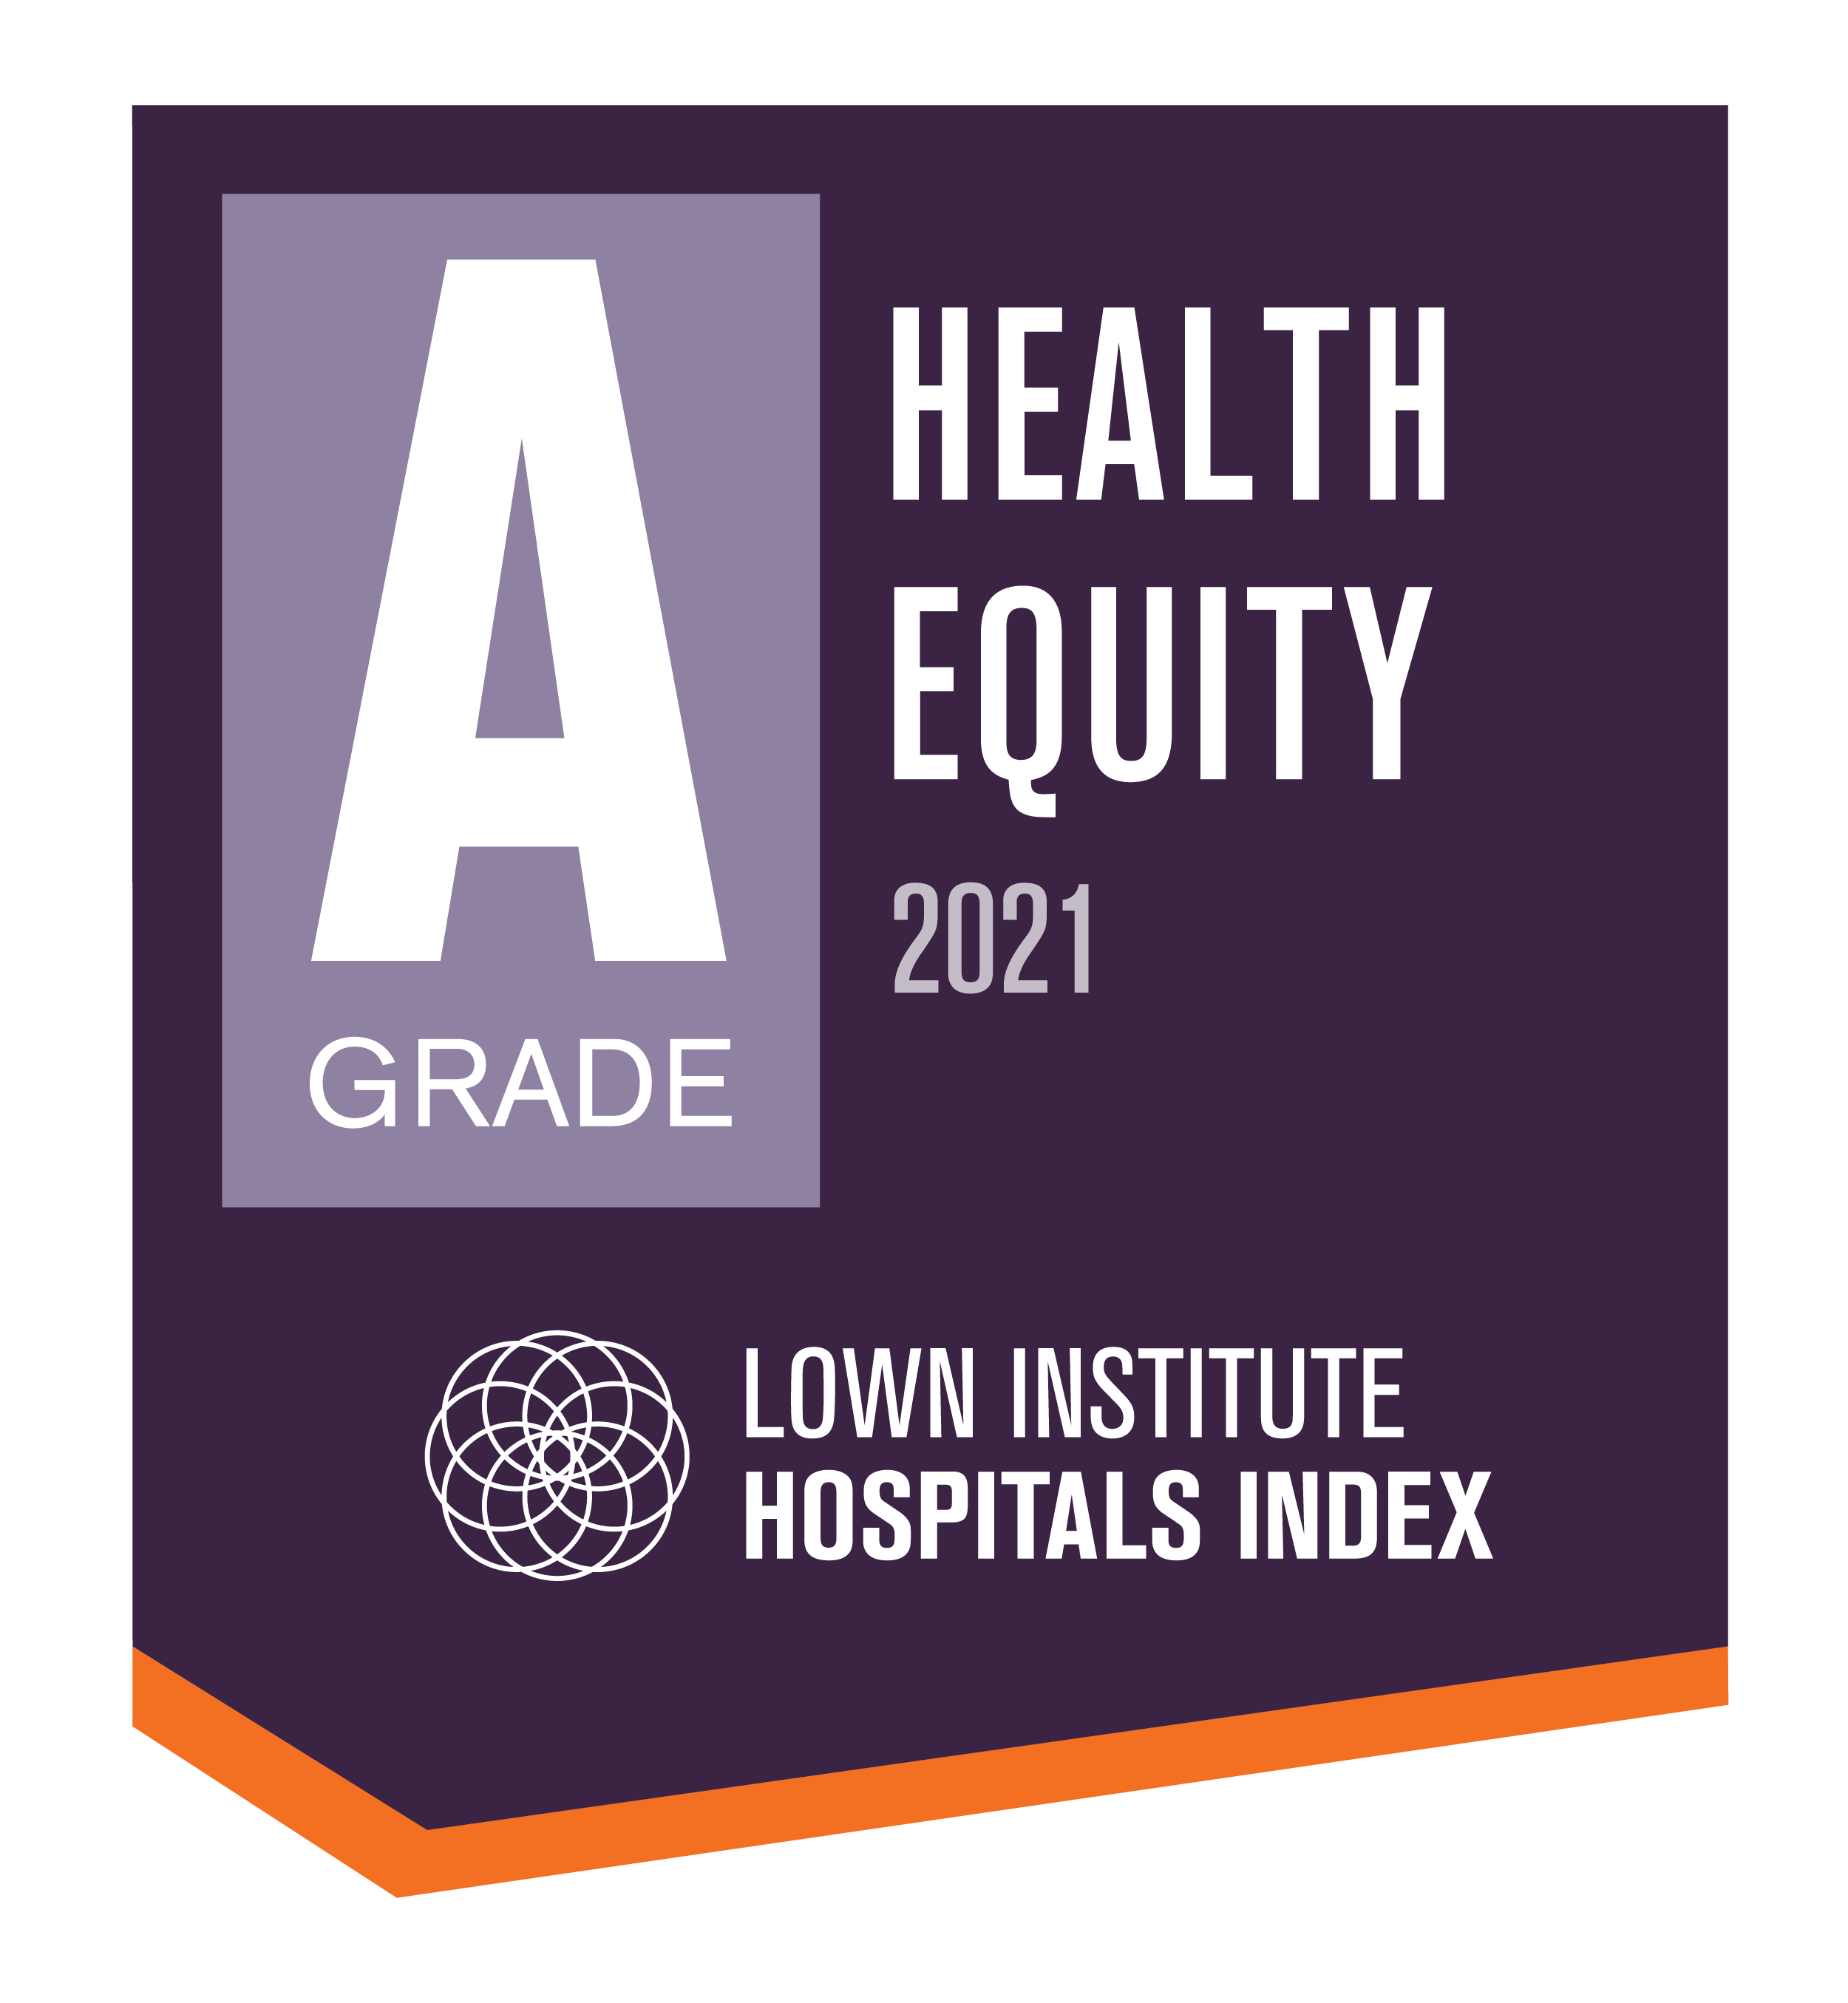 2021 Lown Institute - A Grade for Health Equity